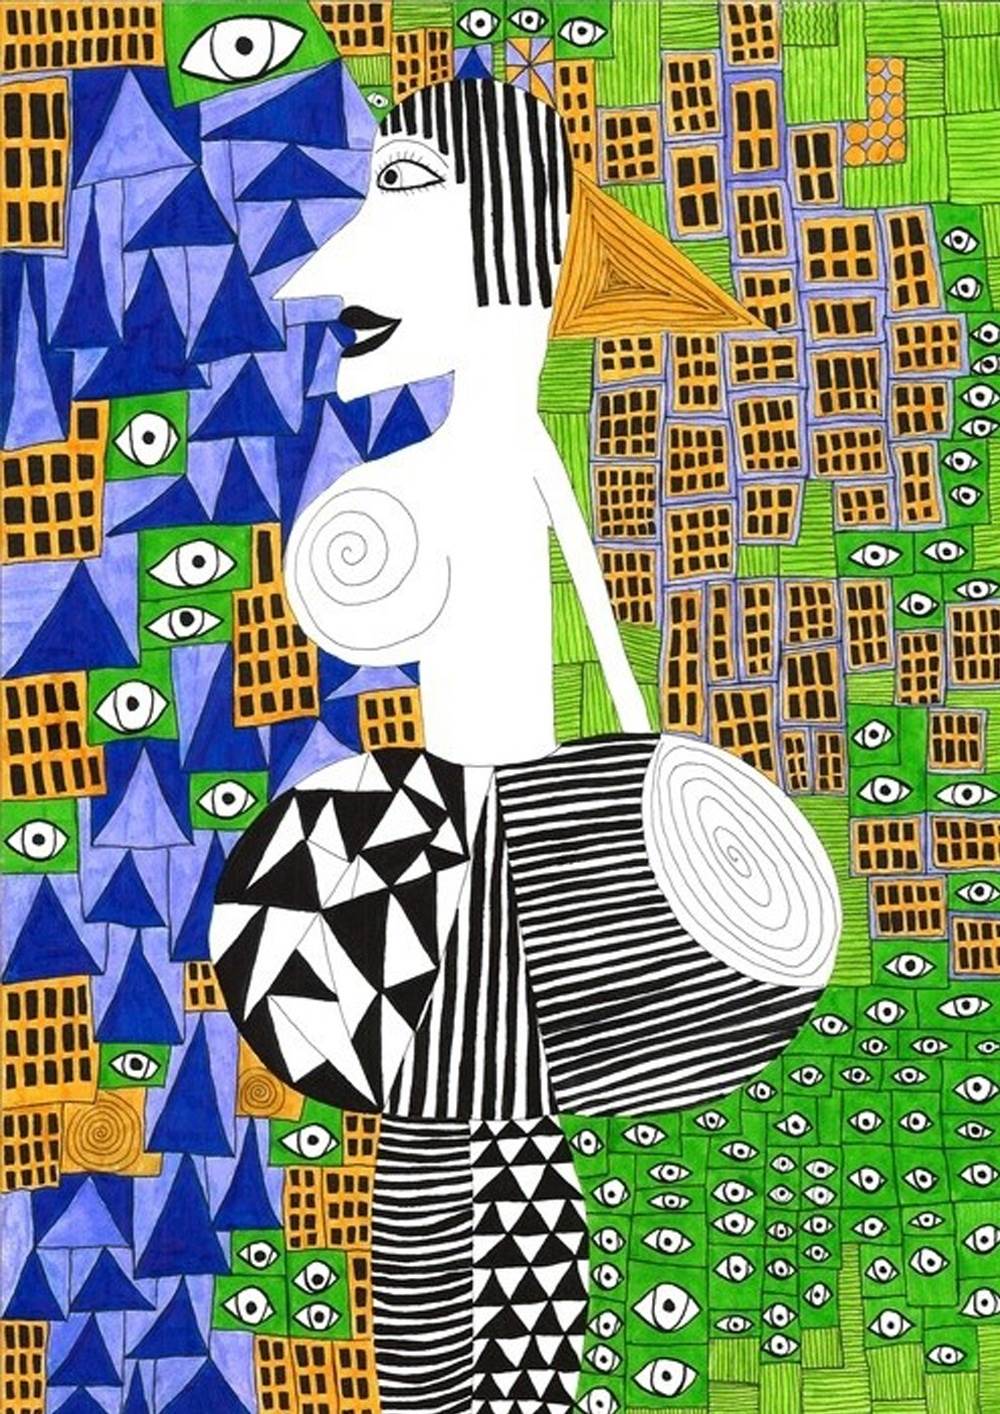 City Woman, original Abstract Aquatint Drawing and Illustration by Inês Peres